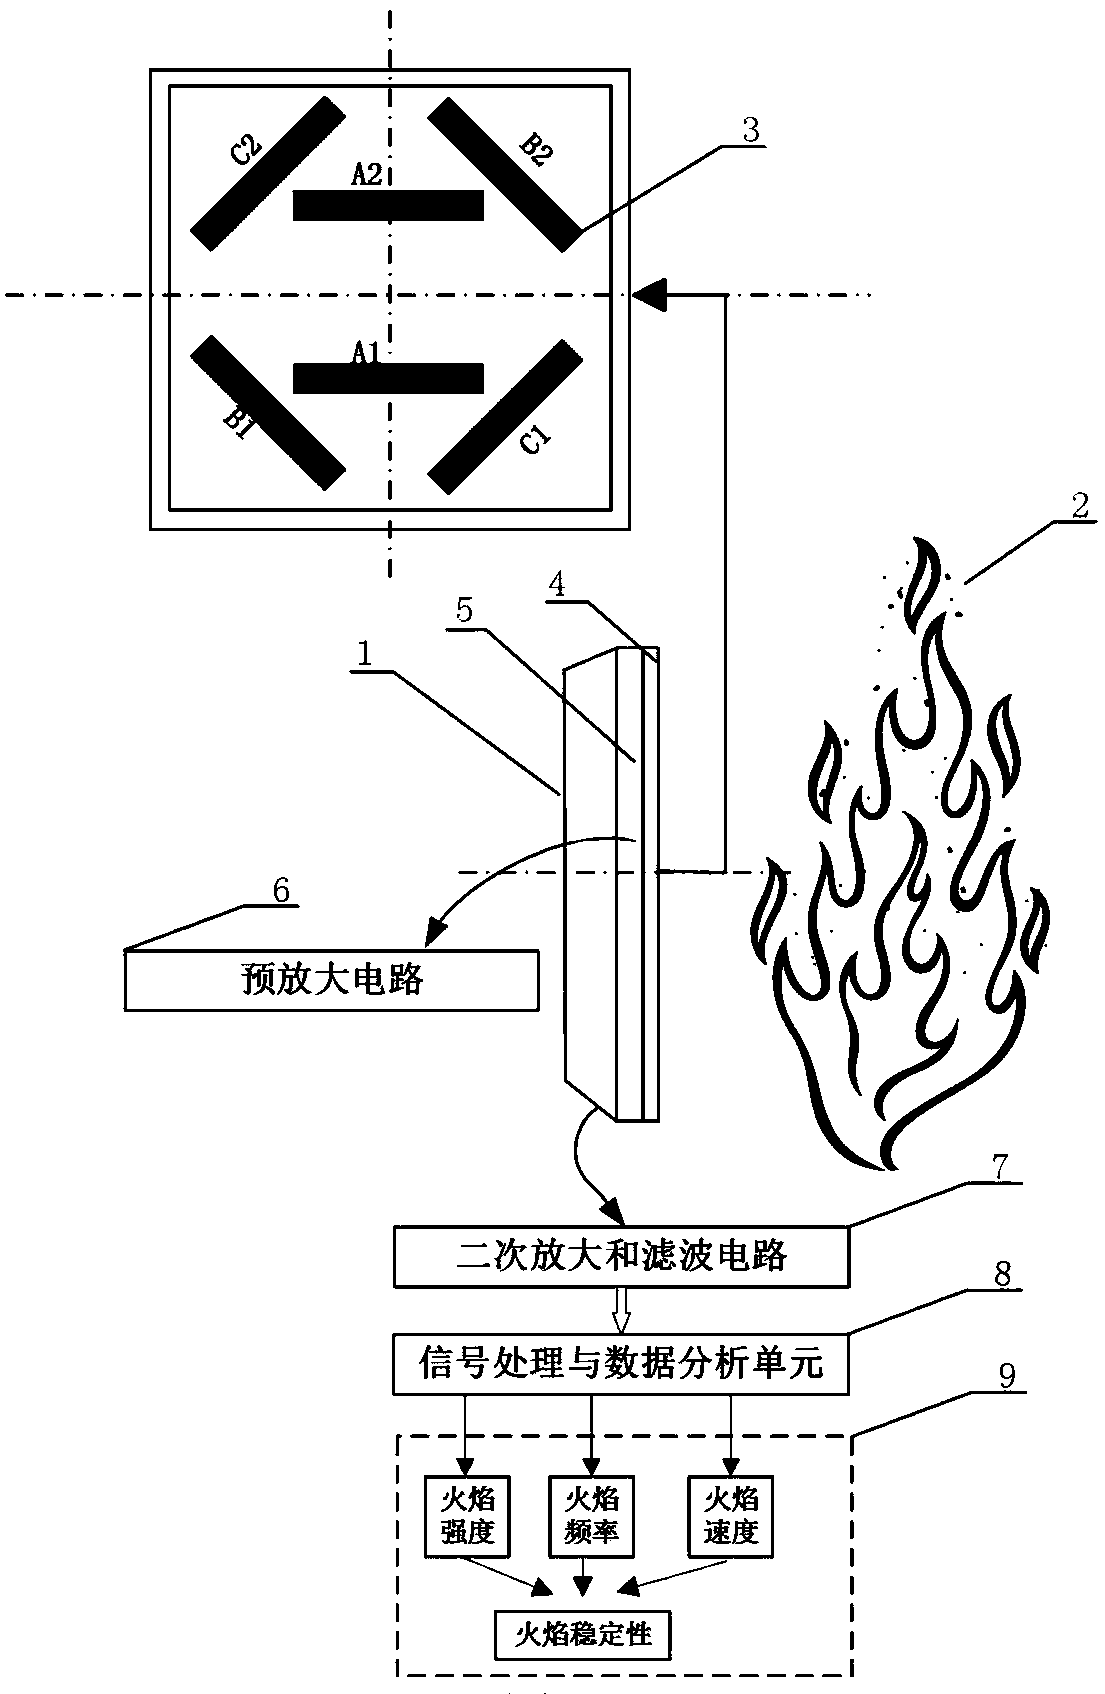 Device and method for monitoring flame stability based on electrostatic sensor